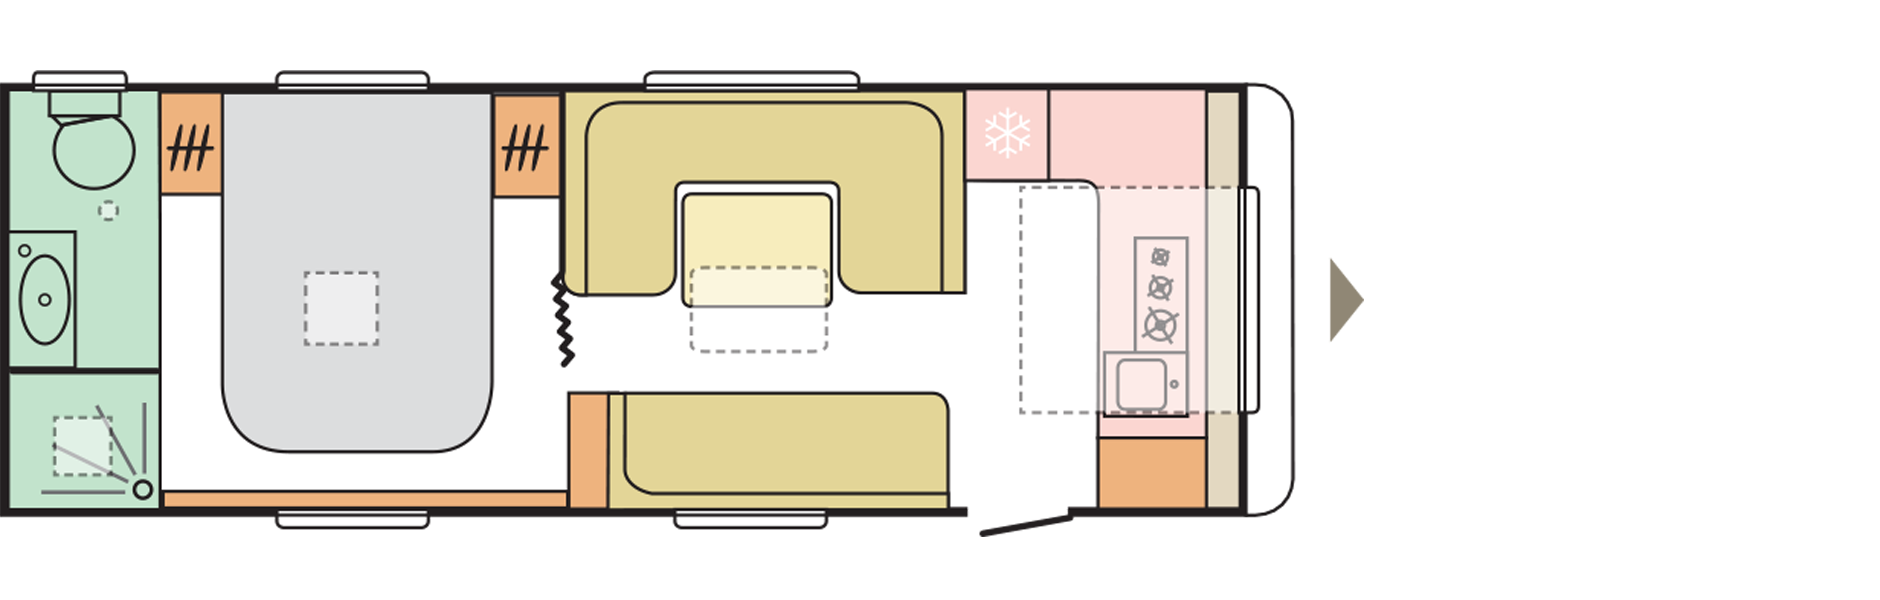 Day layout